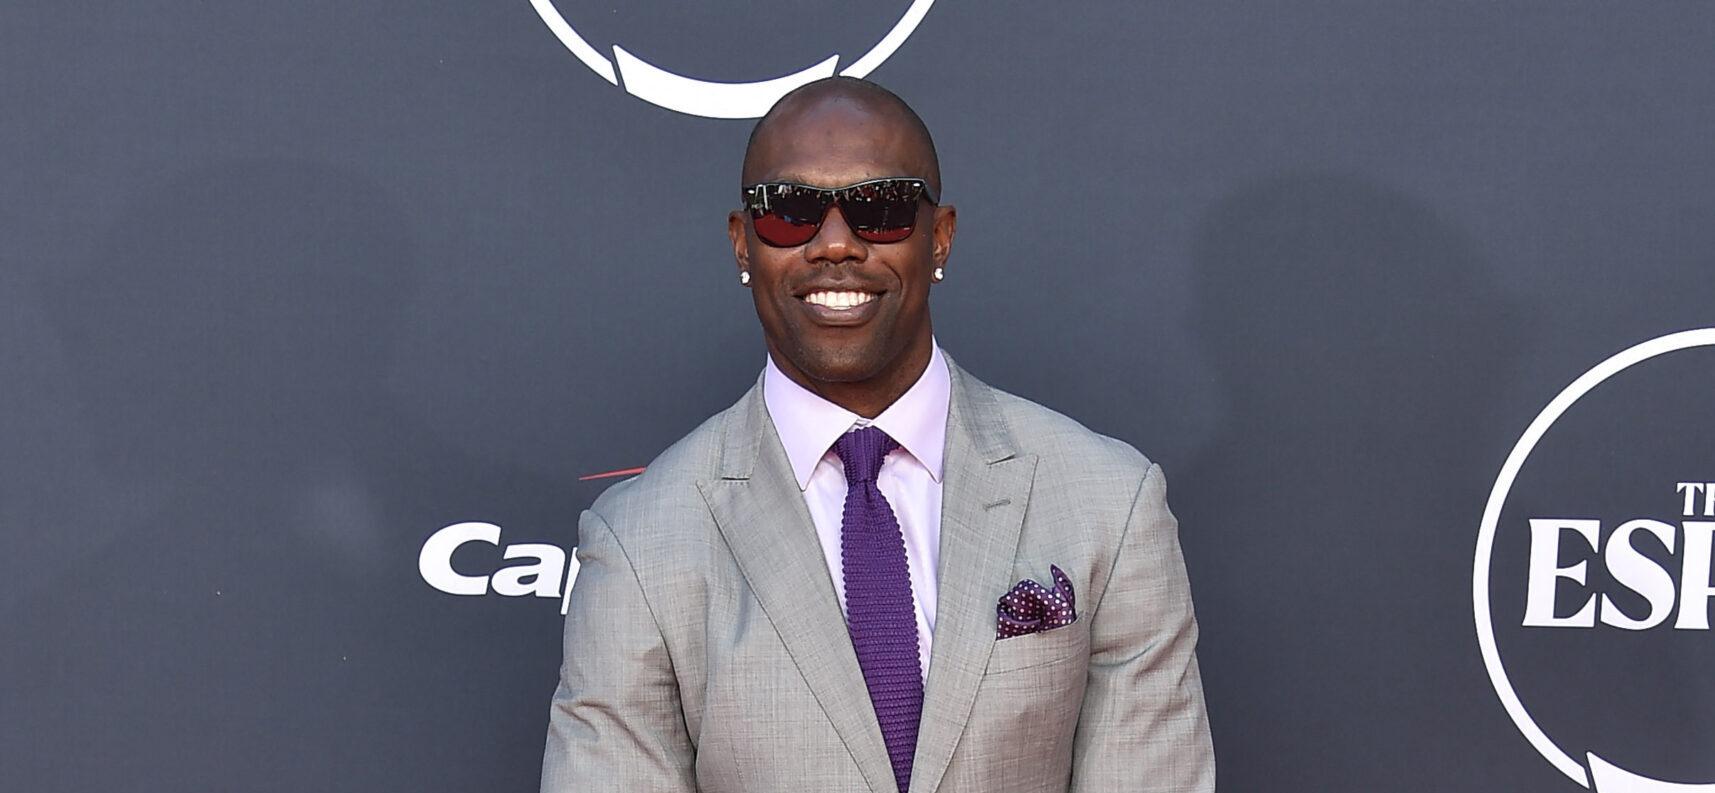 Terrell Owens Intentionally Hit By Car After Argument At Basketball Game